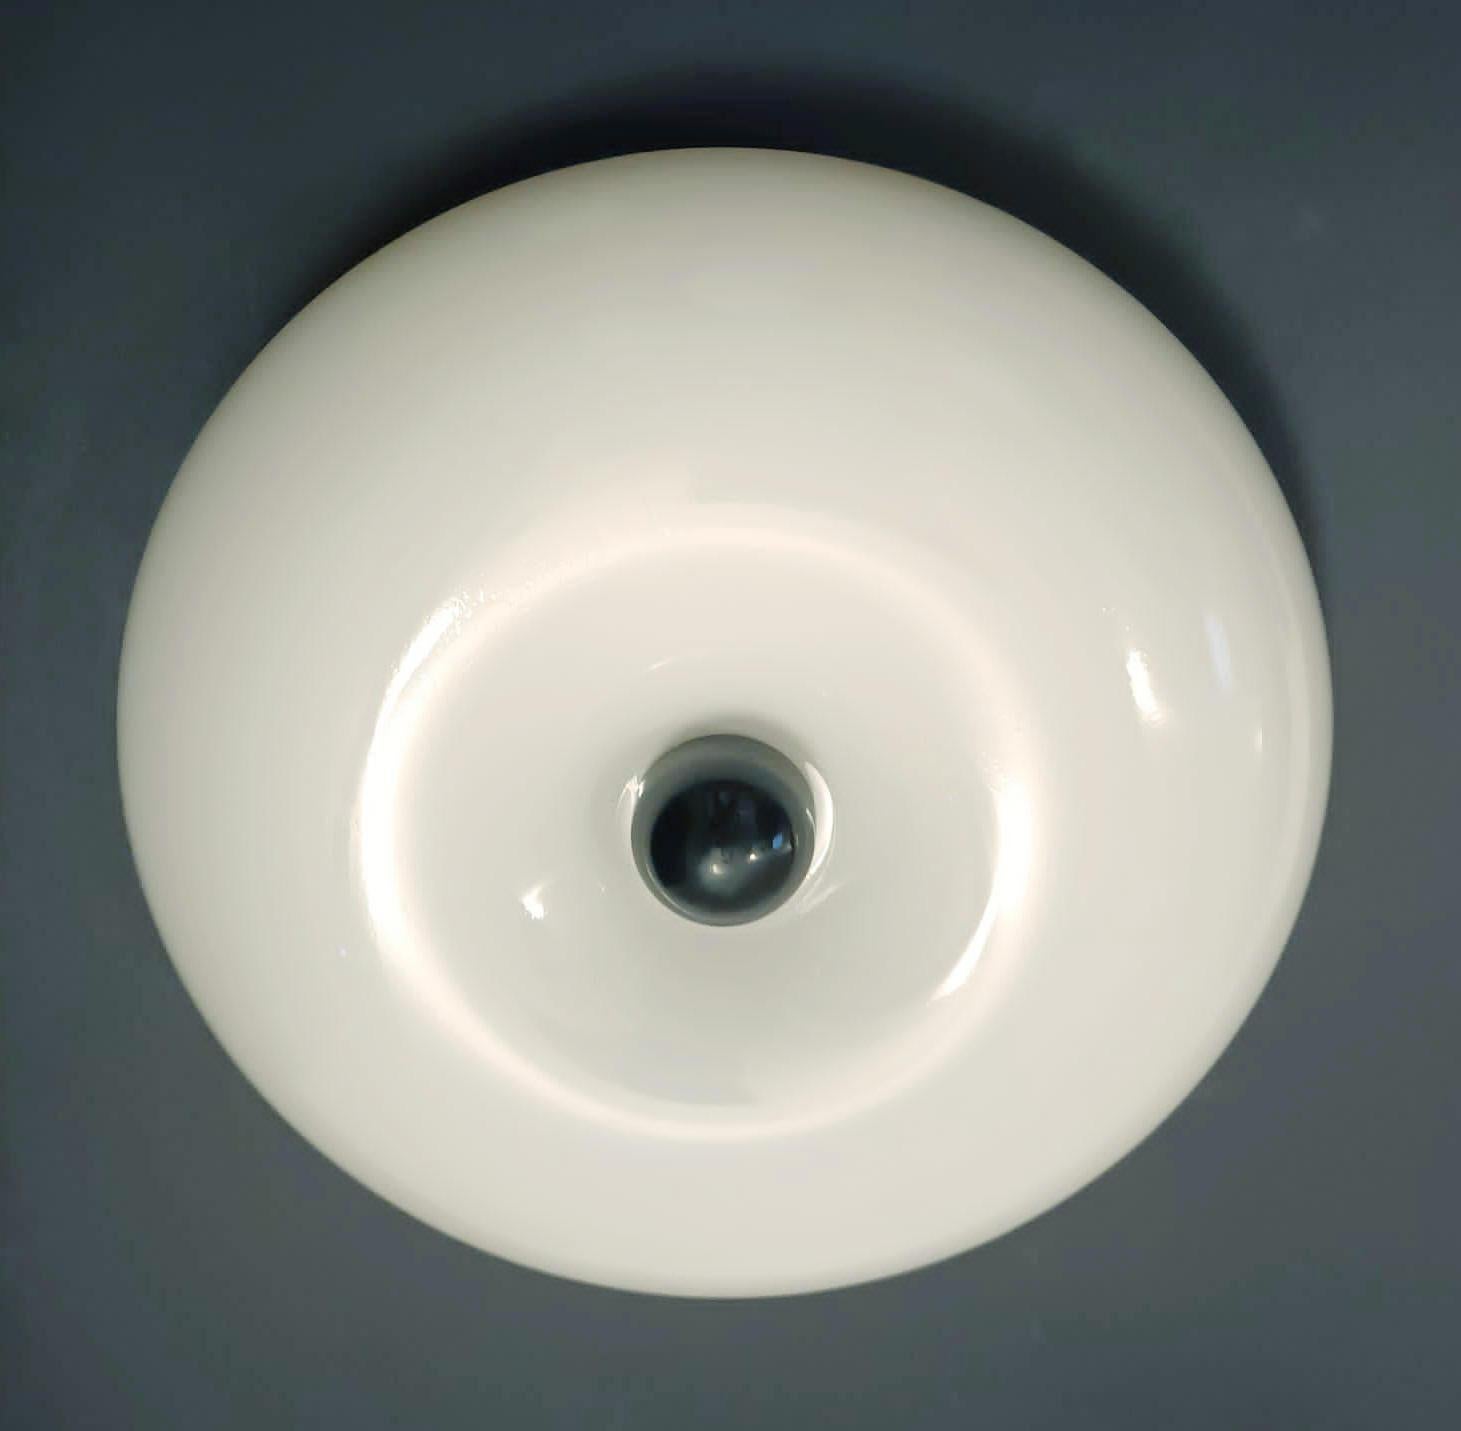 Vintage Italian flush mount or wall light with a single milky white Murano glass shade / Made in Italy by Vistosi, circa 1960s
Measures: diameter 14 inches, height 4 inches
3 lights / E12 or E14 type / max 40W each
2 available in stock in Italy,